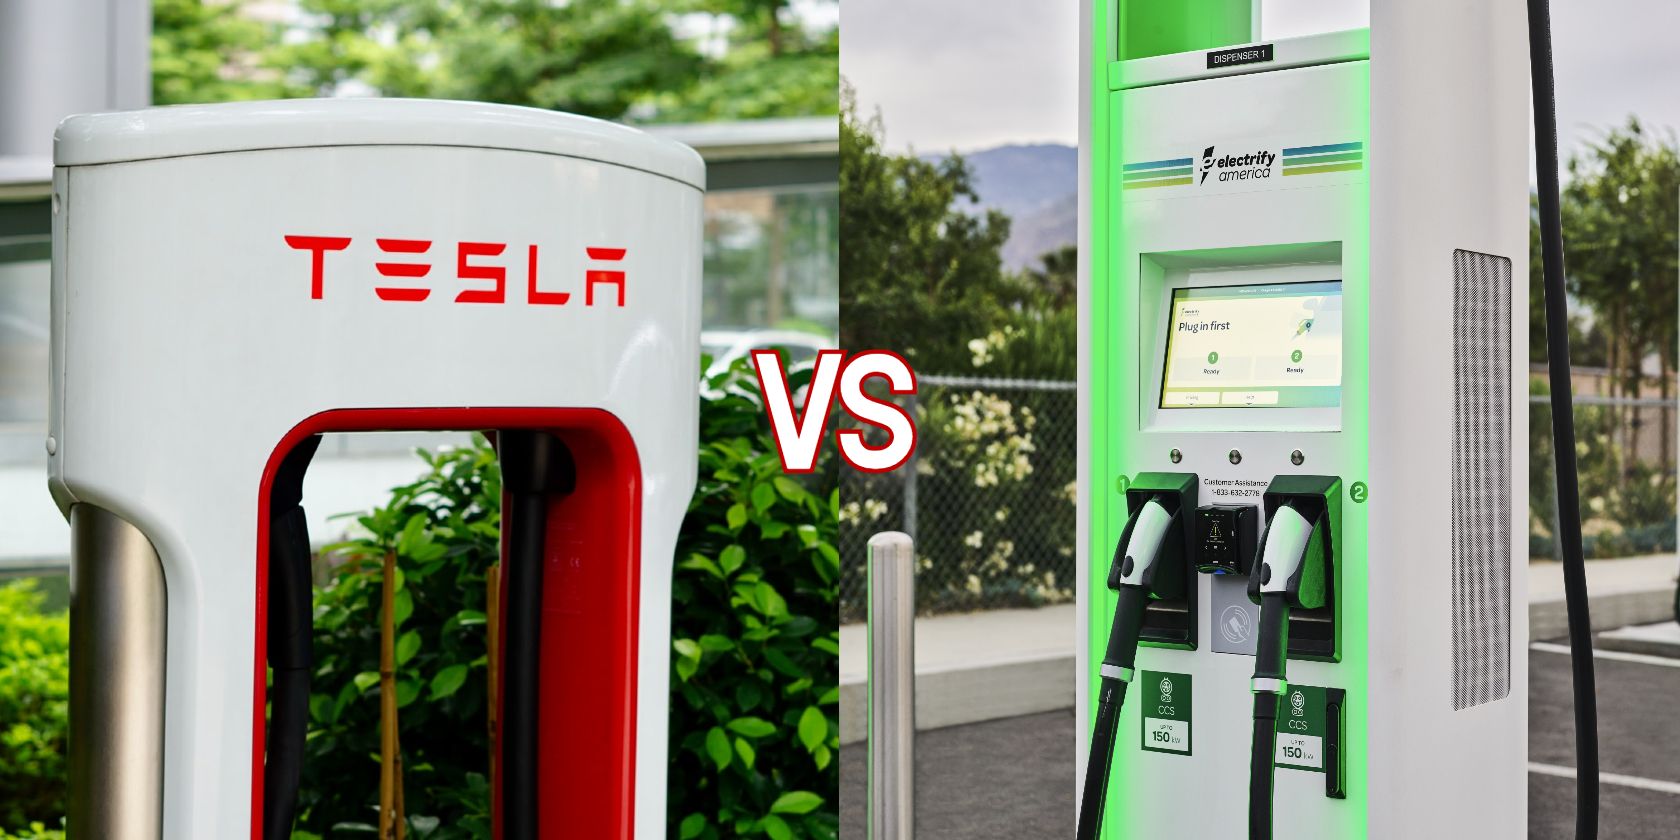 Tesla and Electrify America charging stations side by side